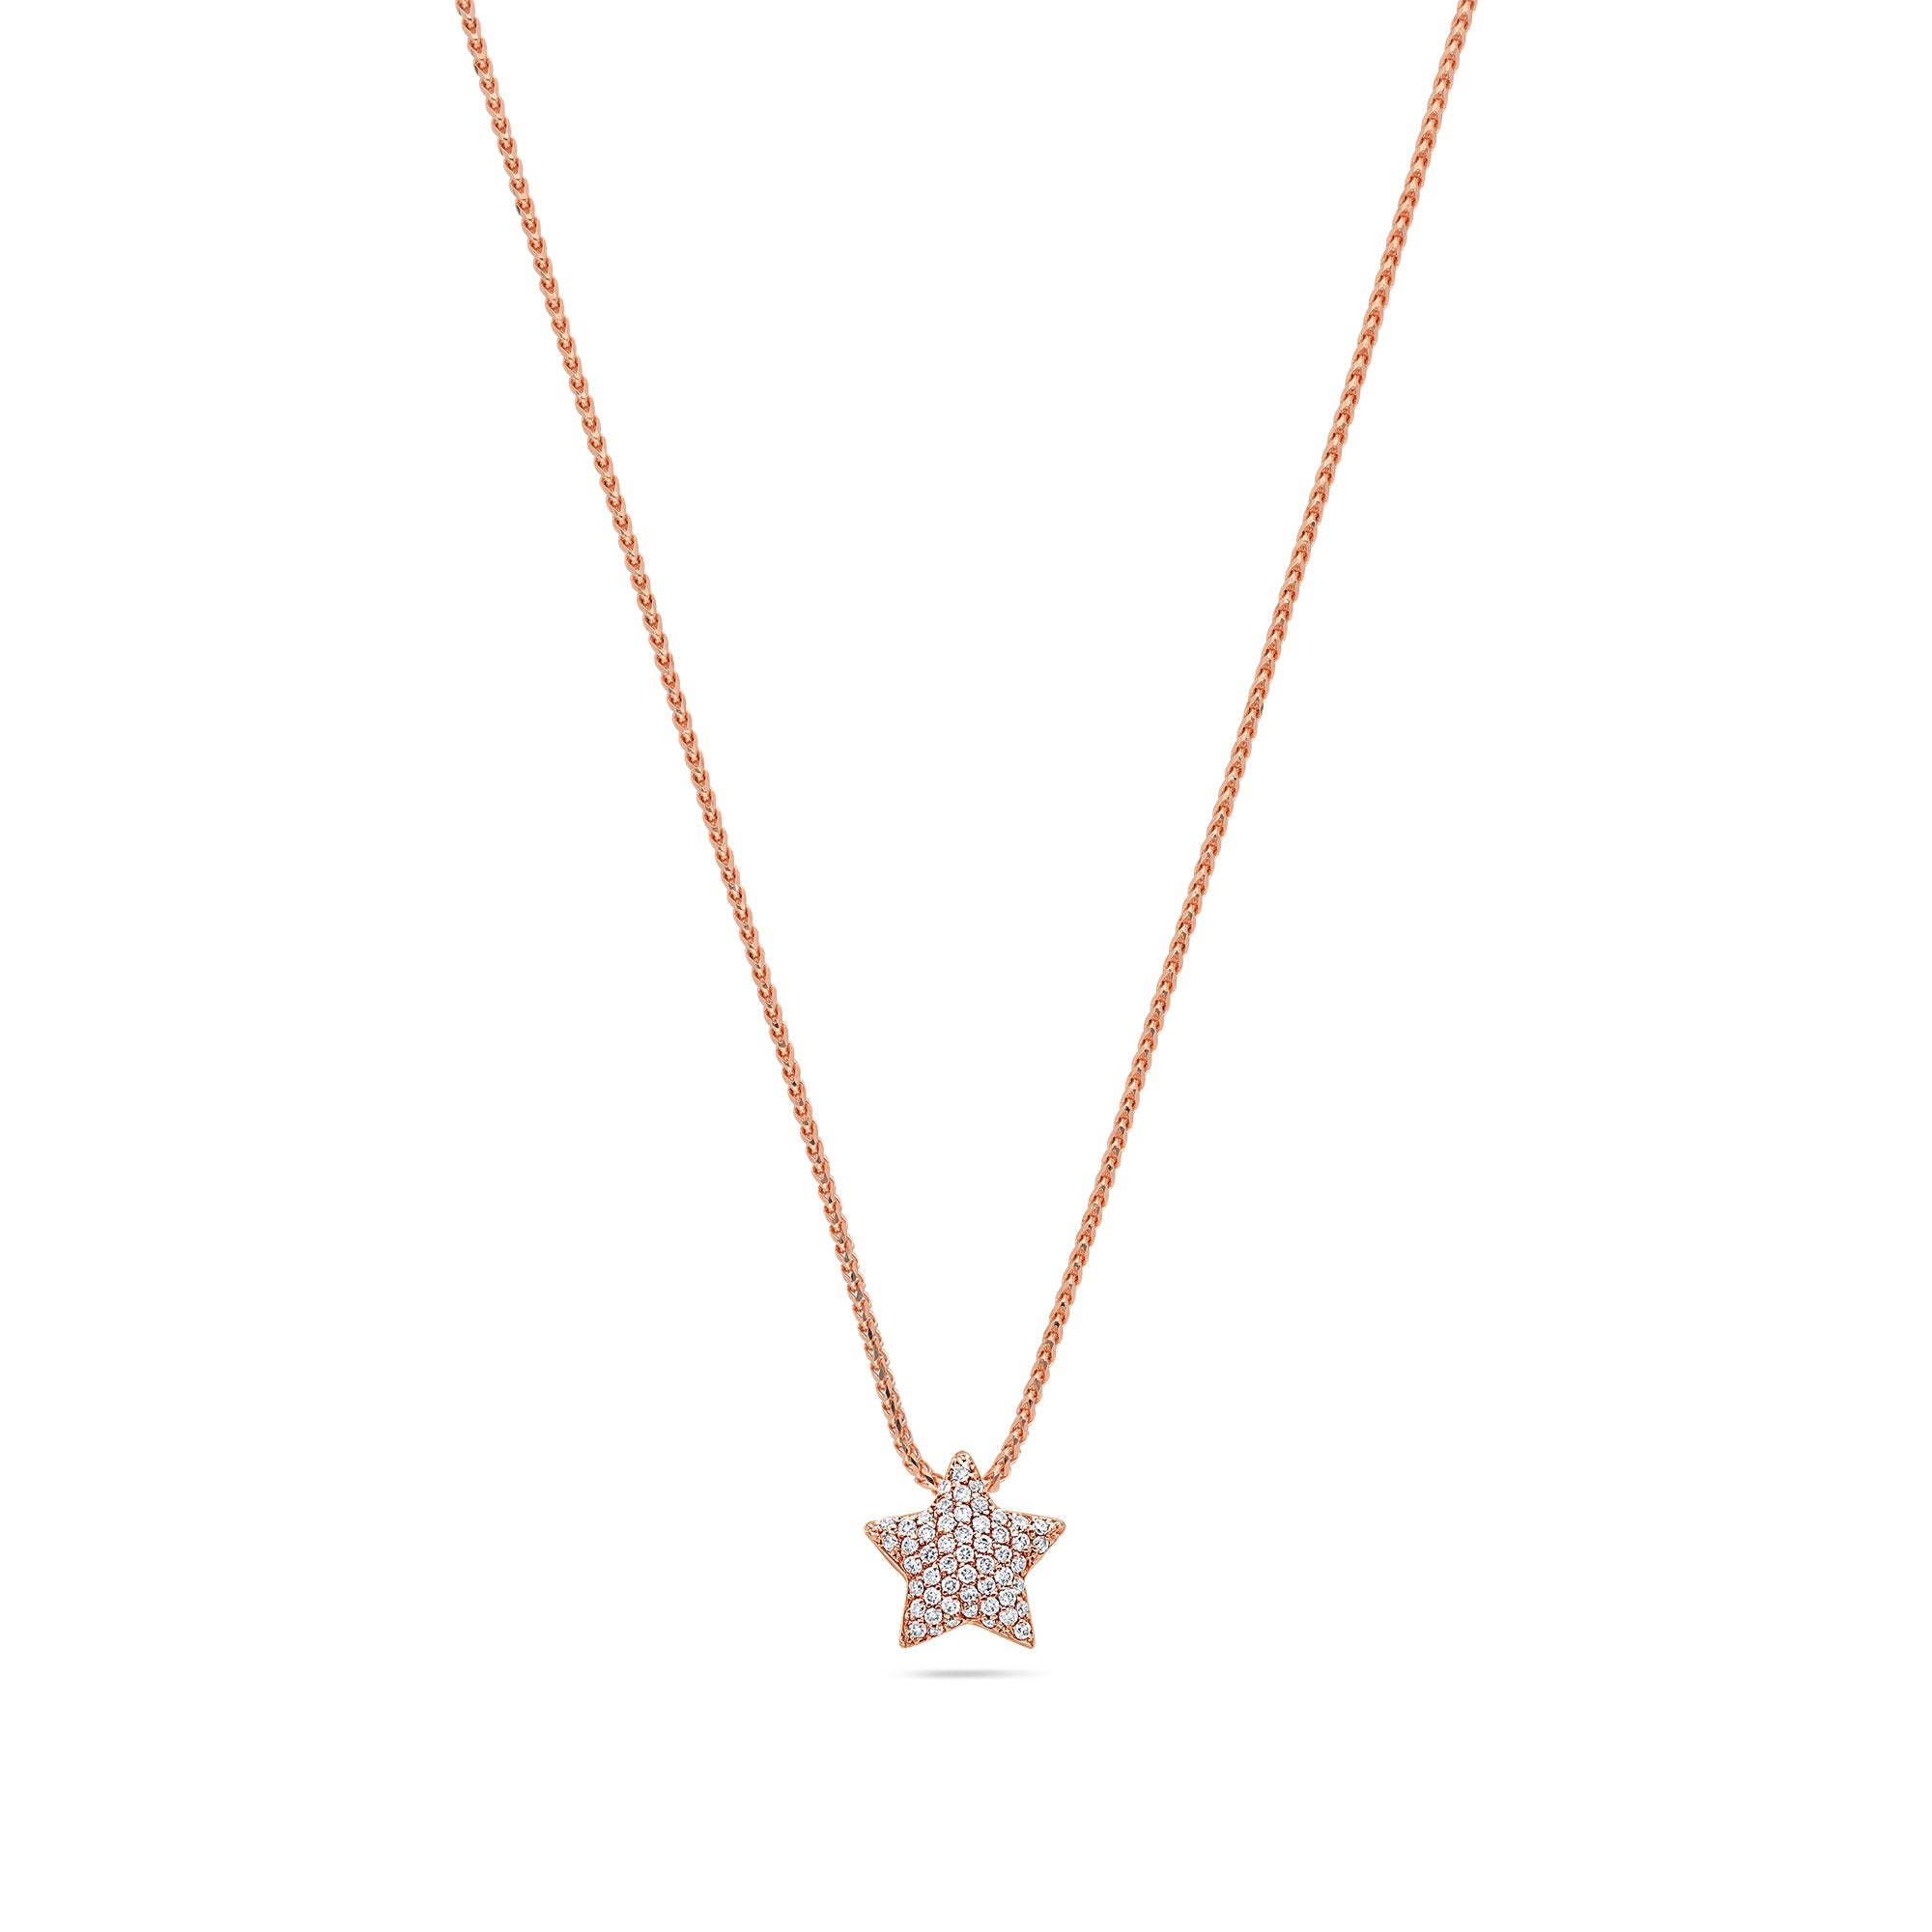 Pico Star Necklace (14K YELLOW GOLD) - IF & Co. Custom Jewelers